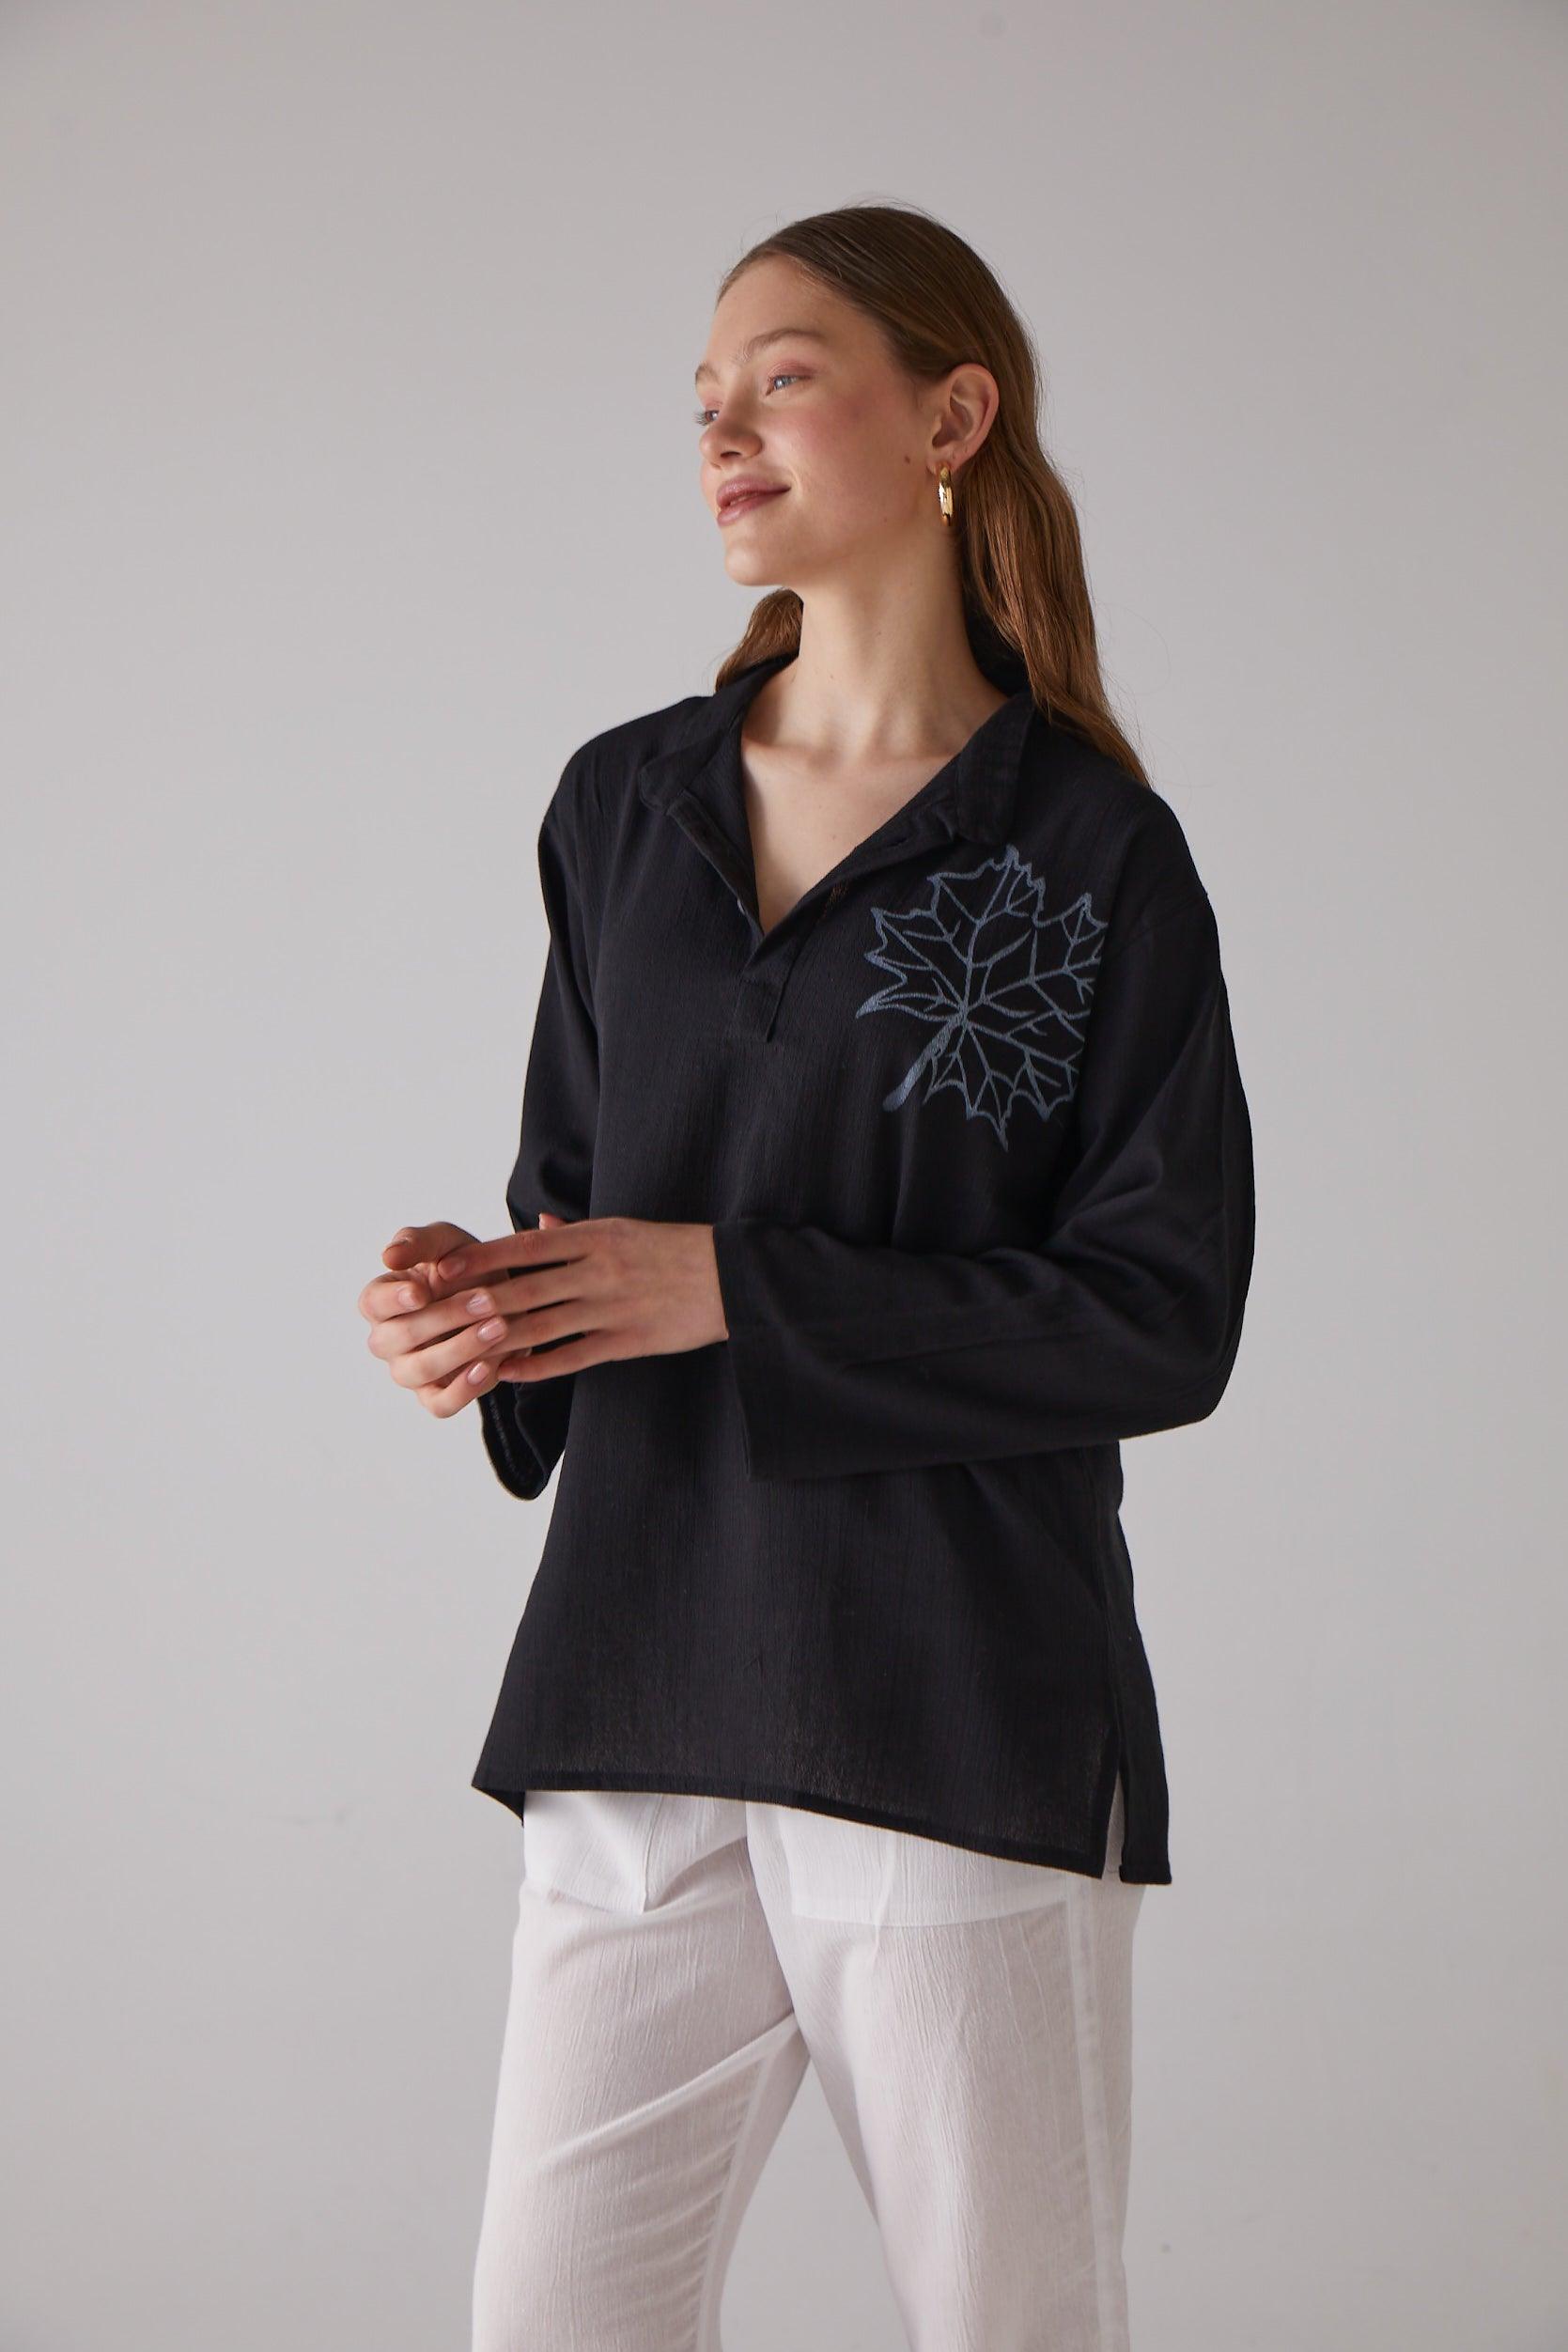 Long - Sleeve Black Shirt with Sycamore Leaf Pattern - 100% Organic Cotton - trendynow